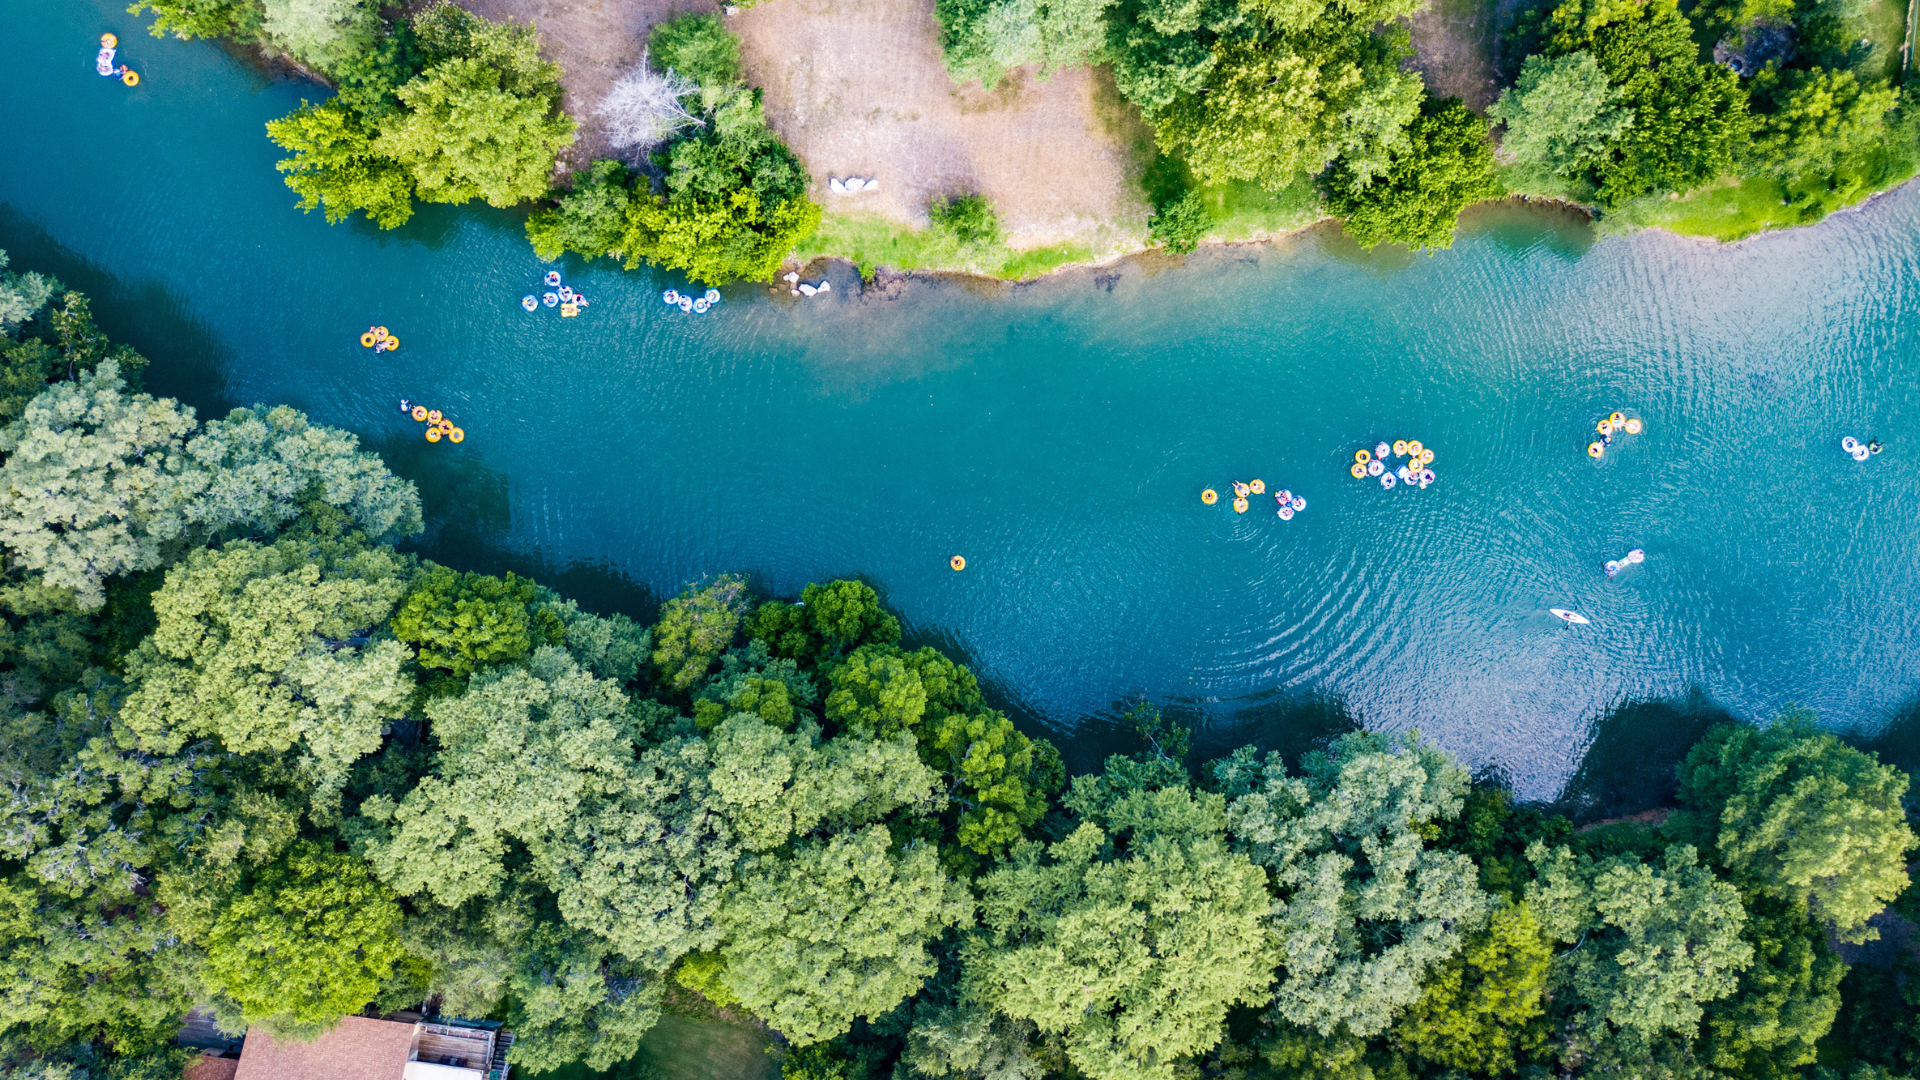 Aeiral image of turquoise water along Comal river with people floating in bright colored tubes